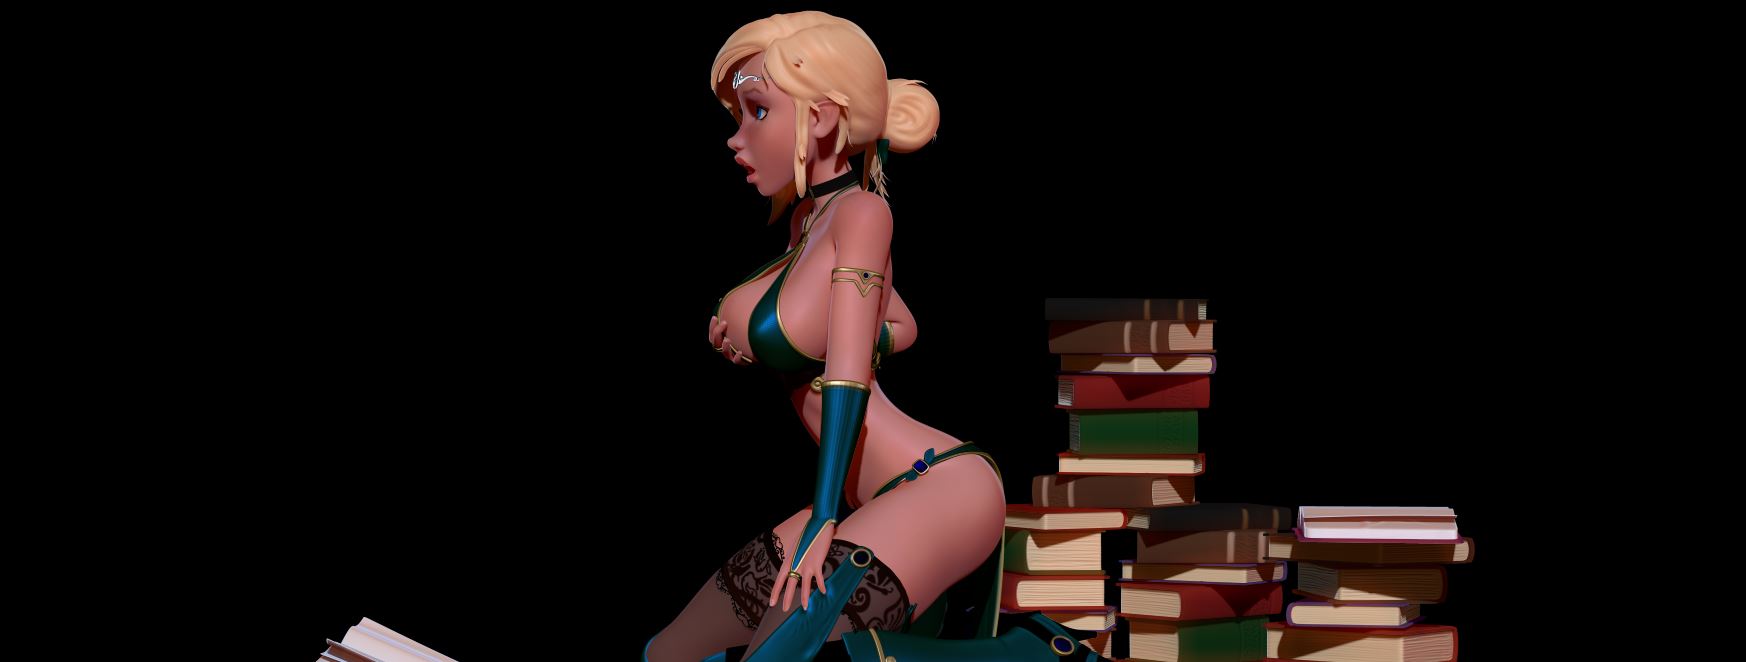 Xxx Aoe - Sorceress Tale Unreal Engine Porn Sex Game v.06242022 Download for Windows